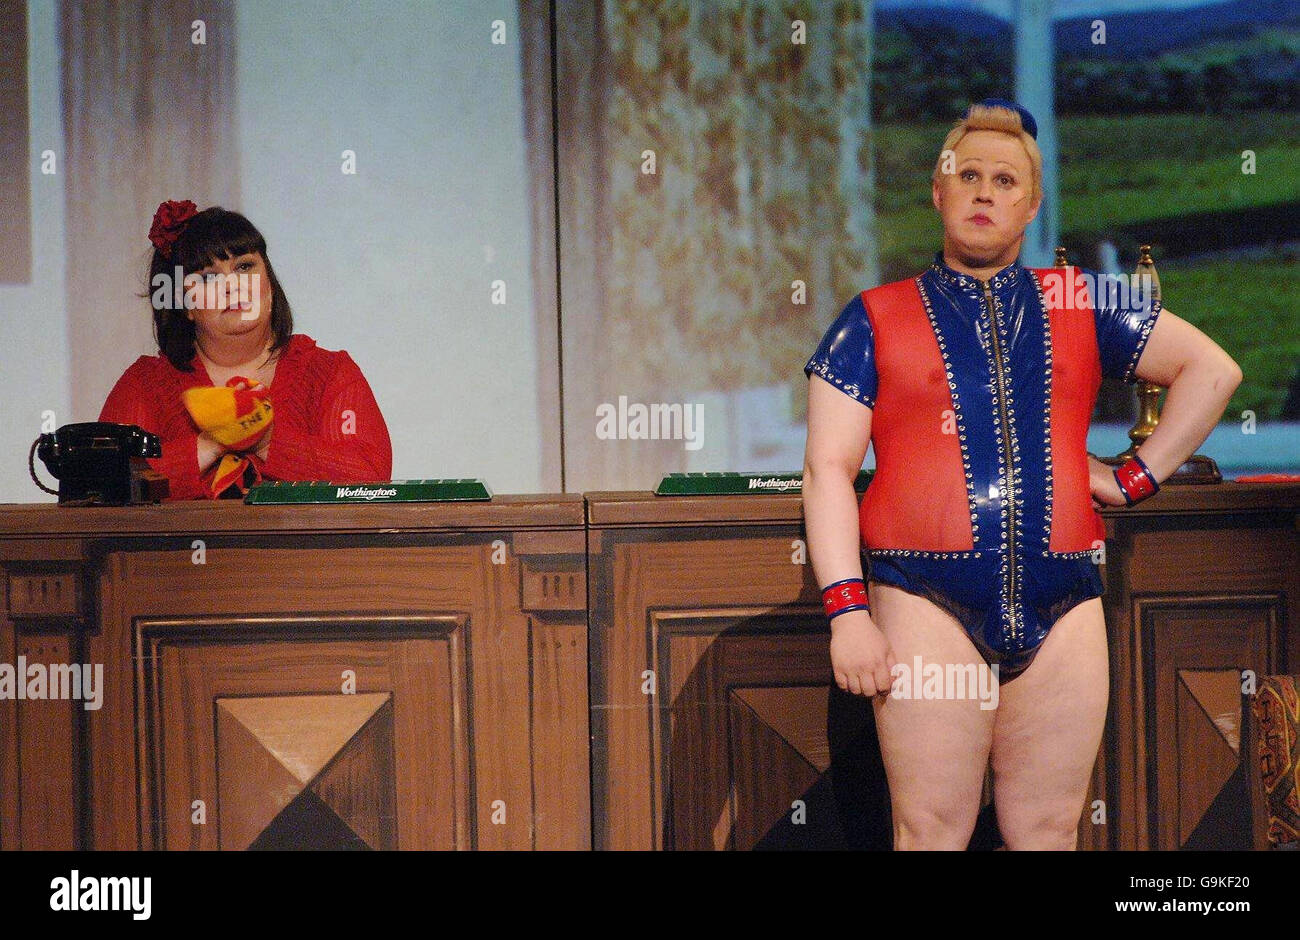 Little Britain Comic Relief Stage Show - London Stock Photo